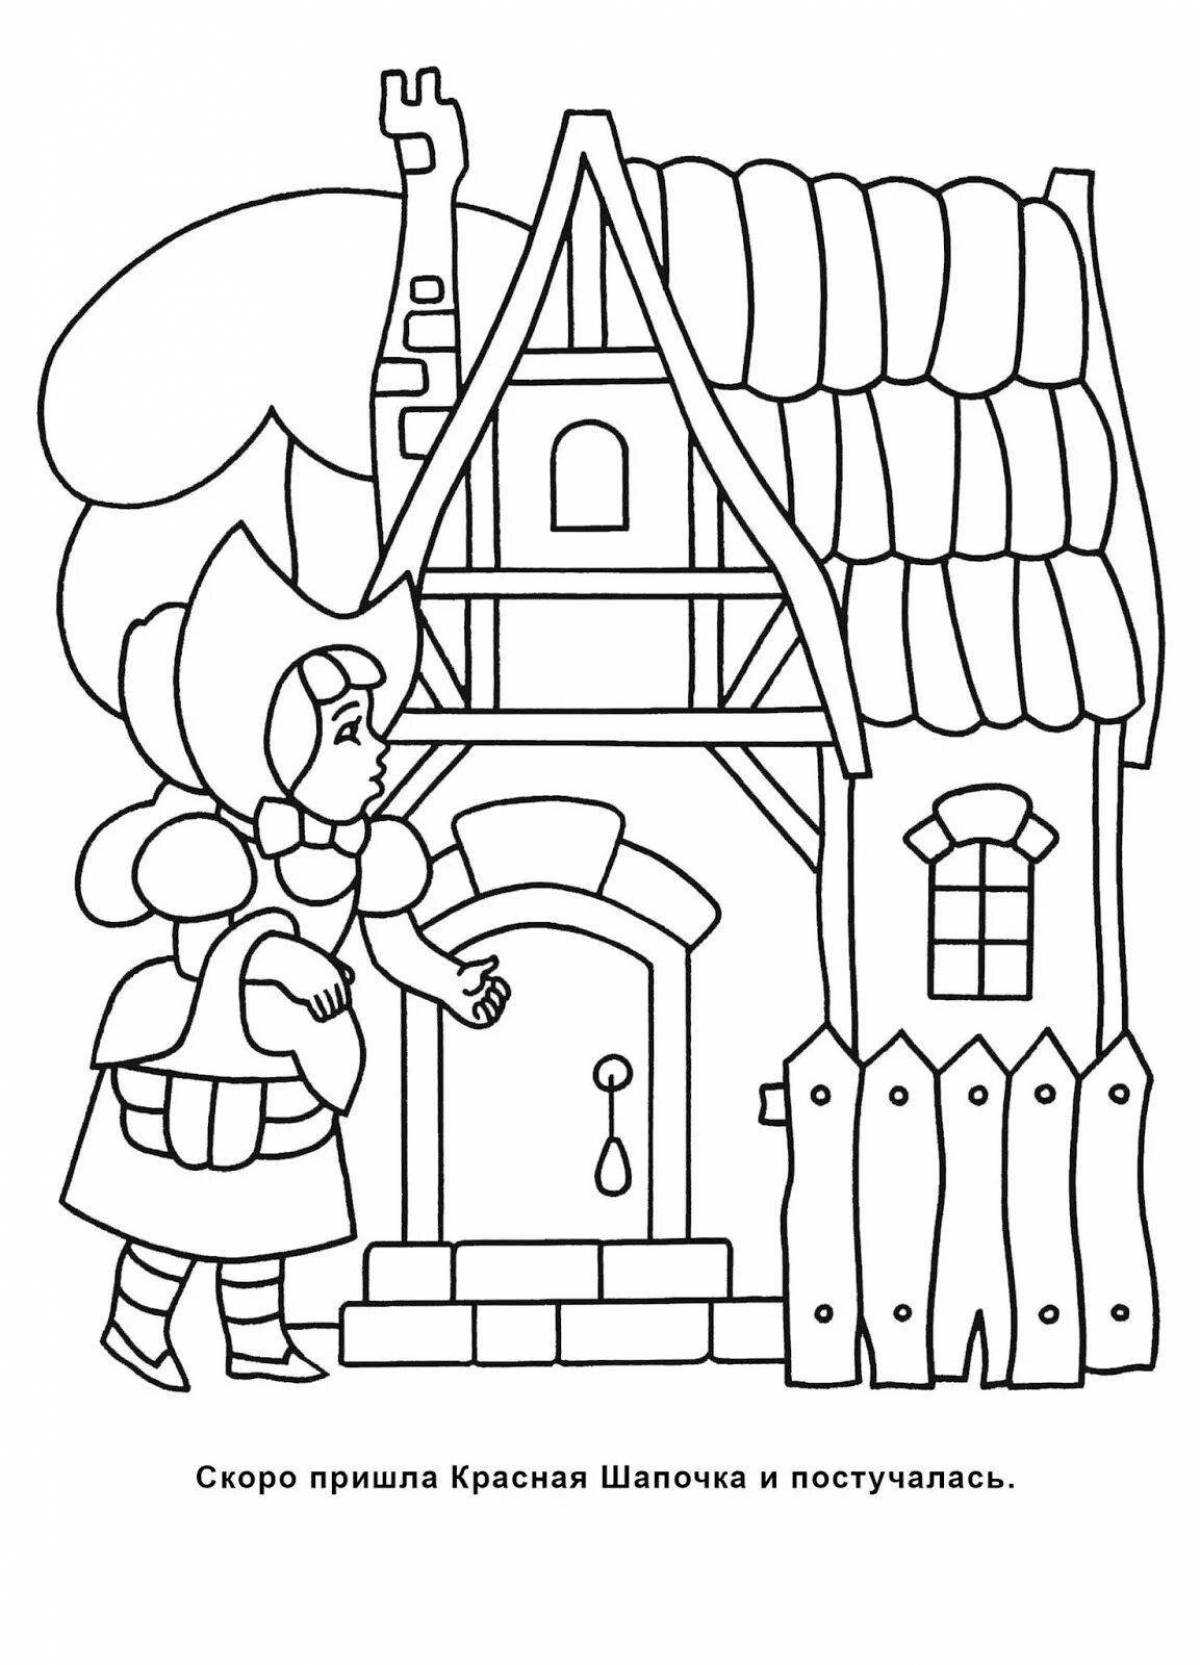 Adorable Perro's Tale Coloring Page for Preschoolers